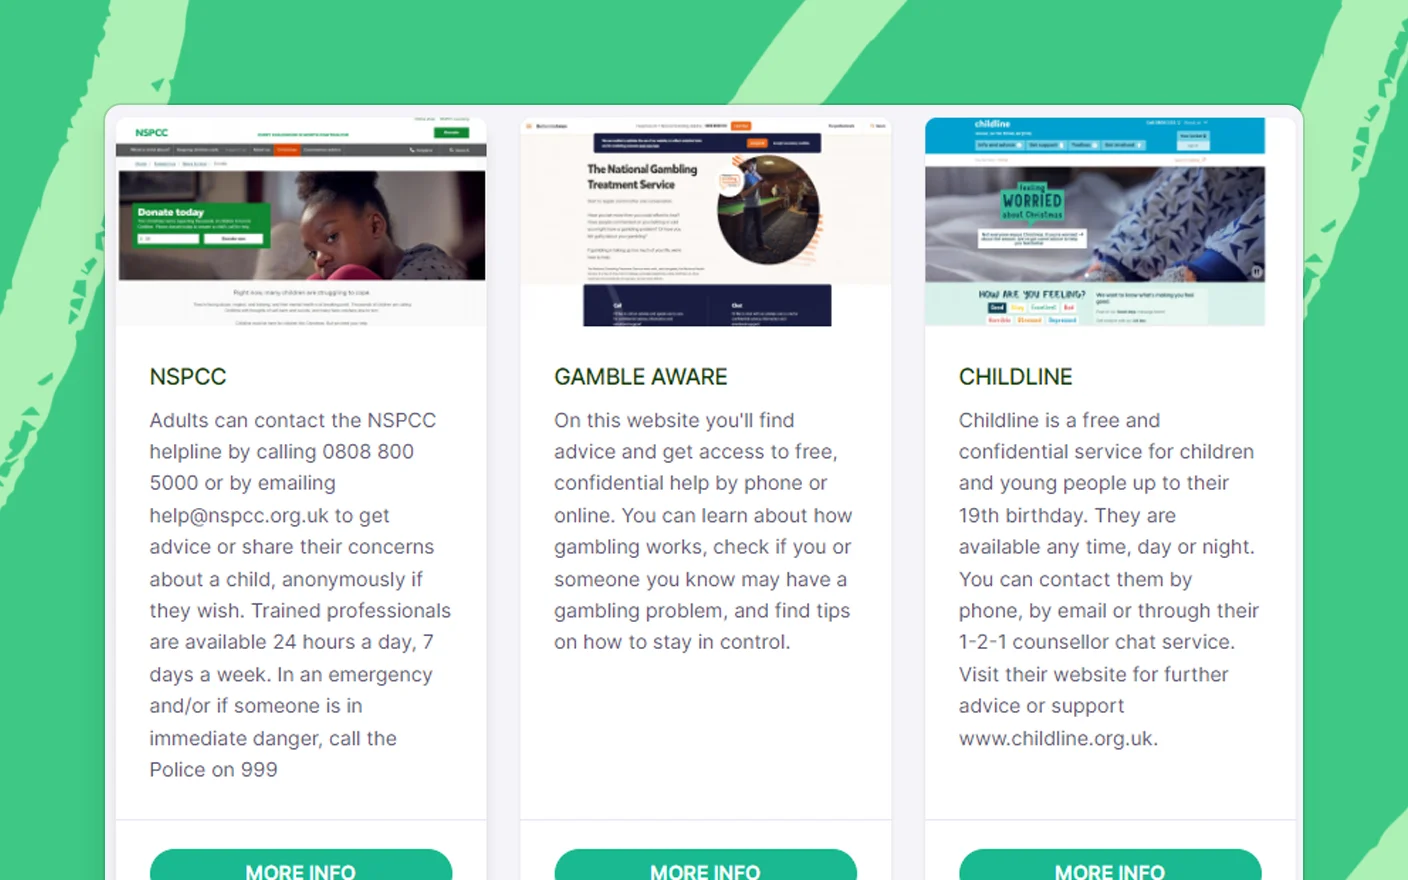 Previews of online resources with logos and brief descriptions from NSPCC, Gamble Aware, and Childline, representing external supportive services accessible through the platform.